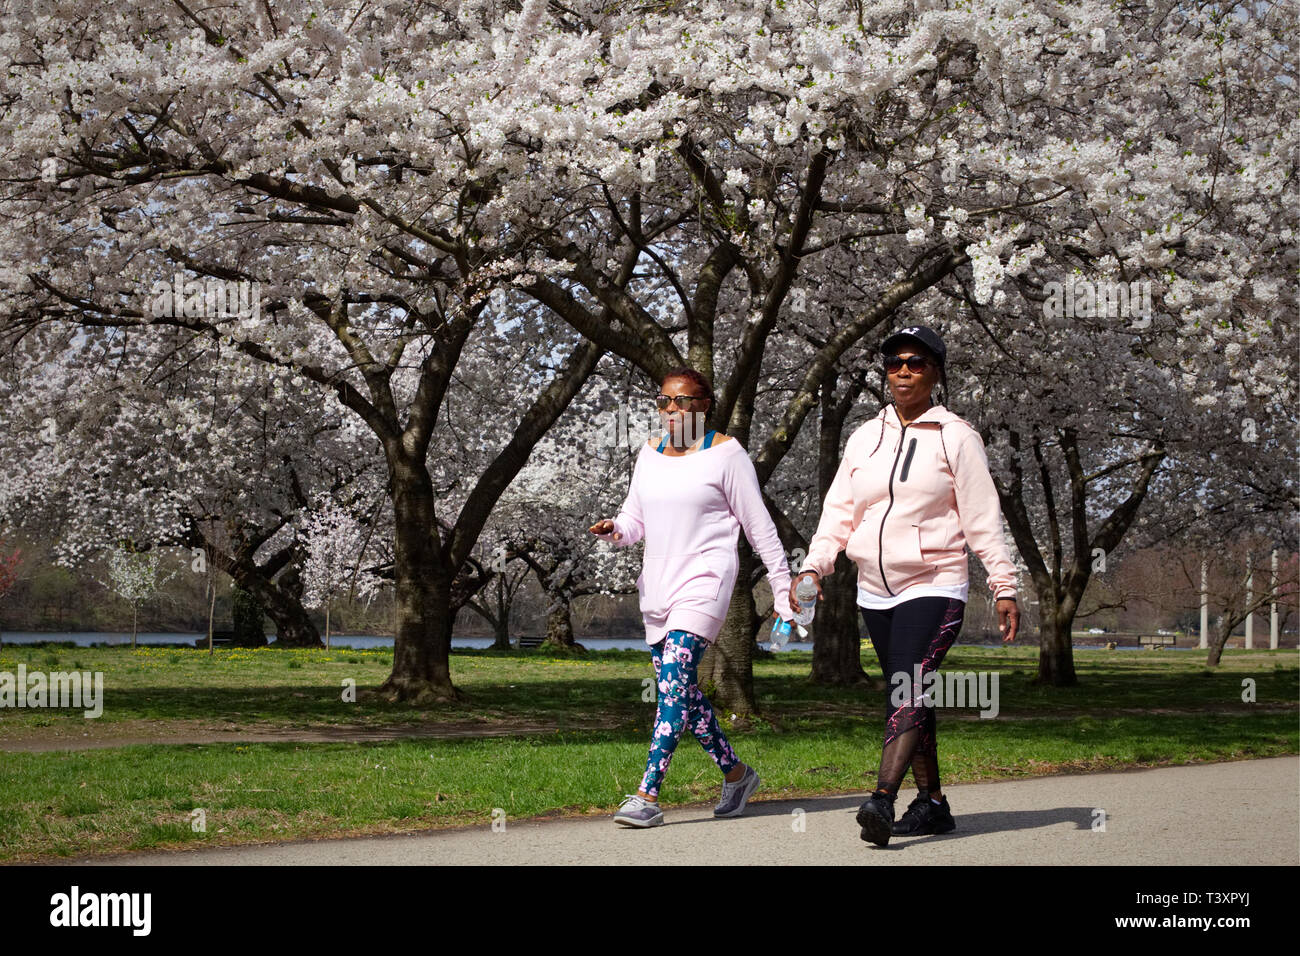 Philadelphia, PA, USA - April 9, 2019: Two elderly African American women stroll by cherry blossoms in peak bloom on an early spring morning. Stock Photo